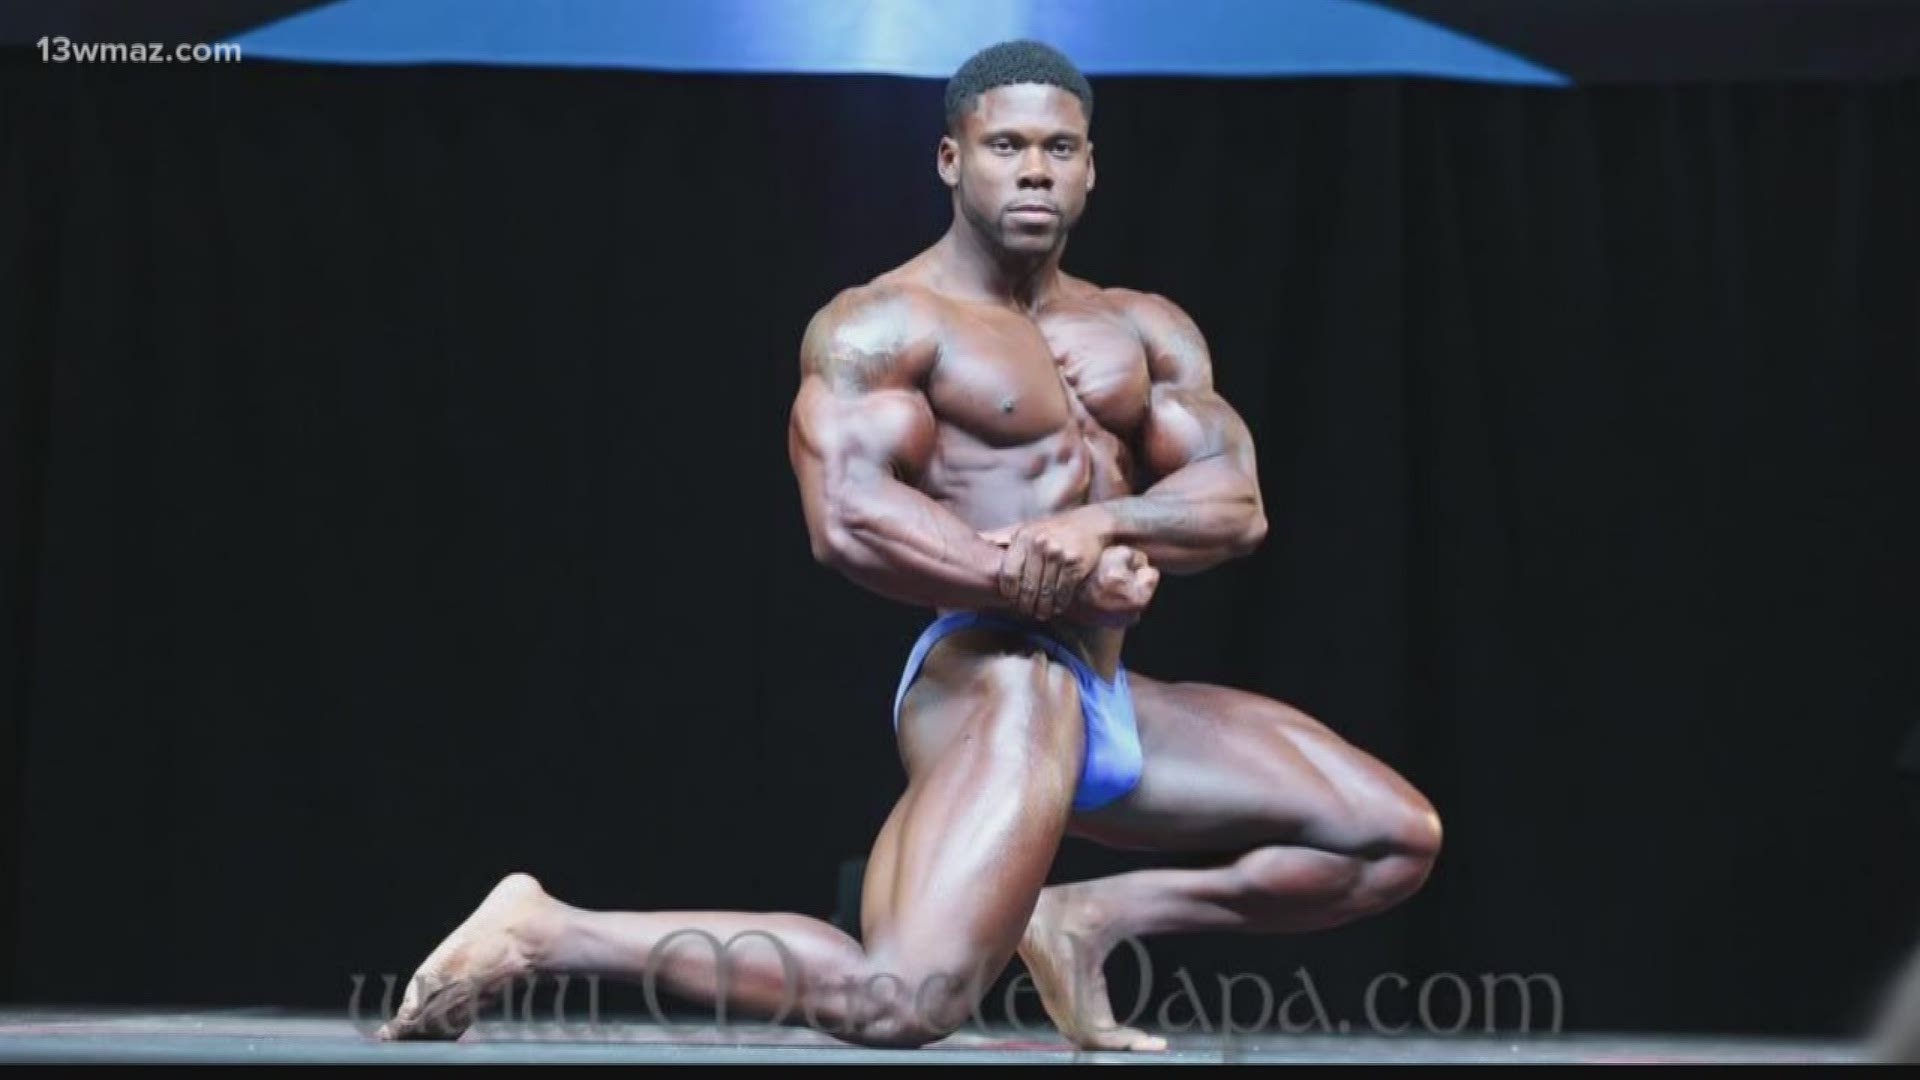 AMPED UP: Bodybuilder wants to inspire others